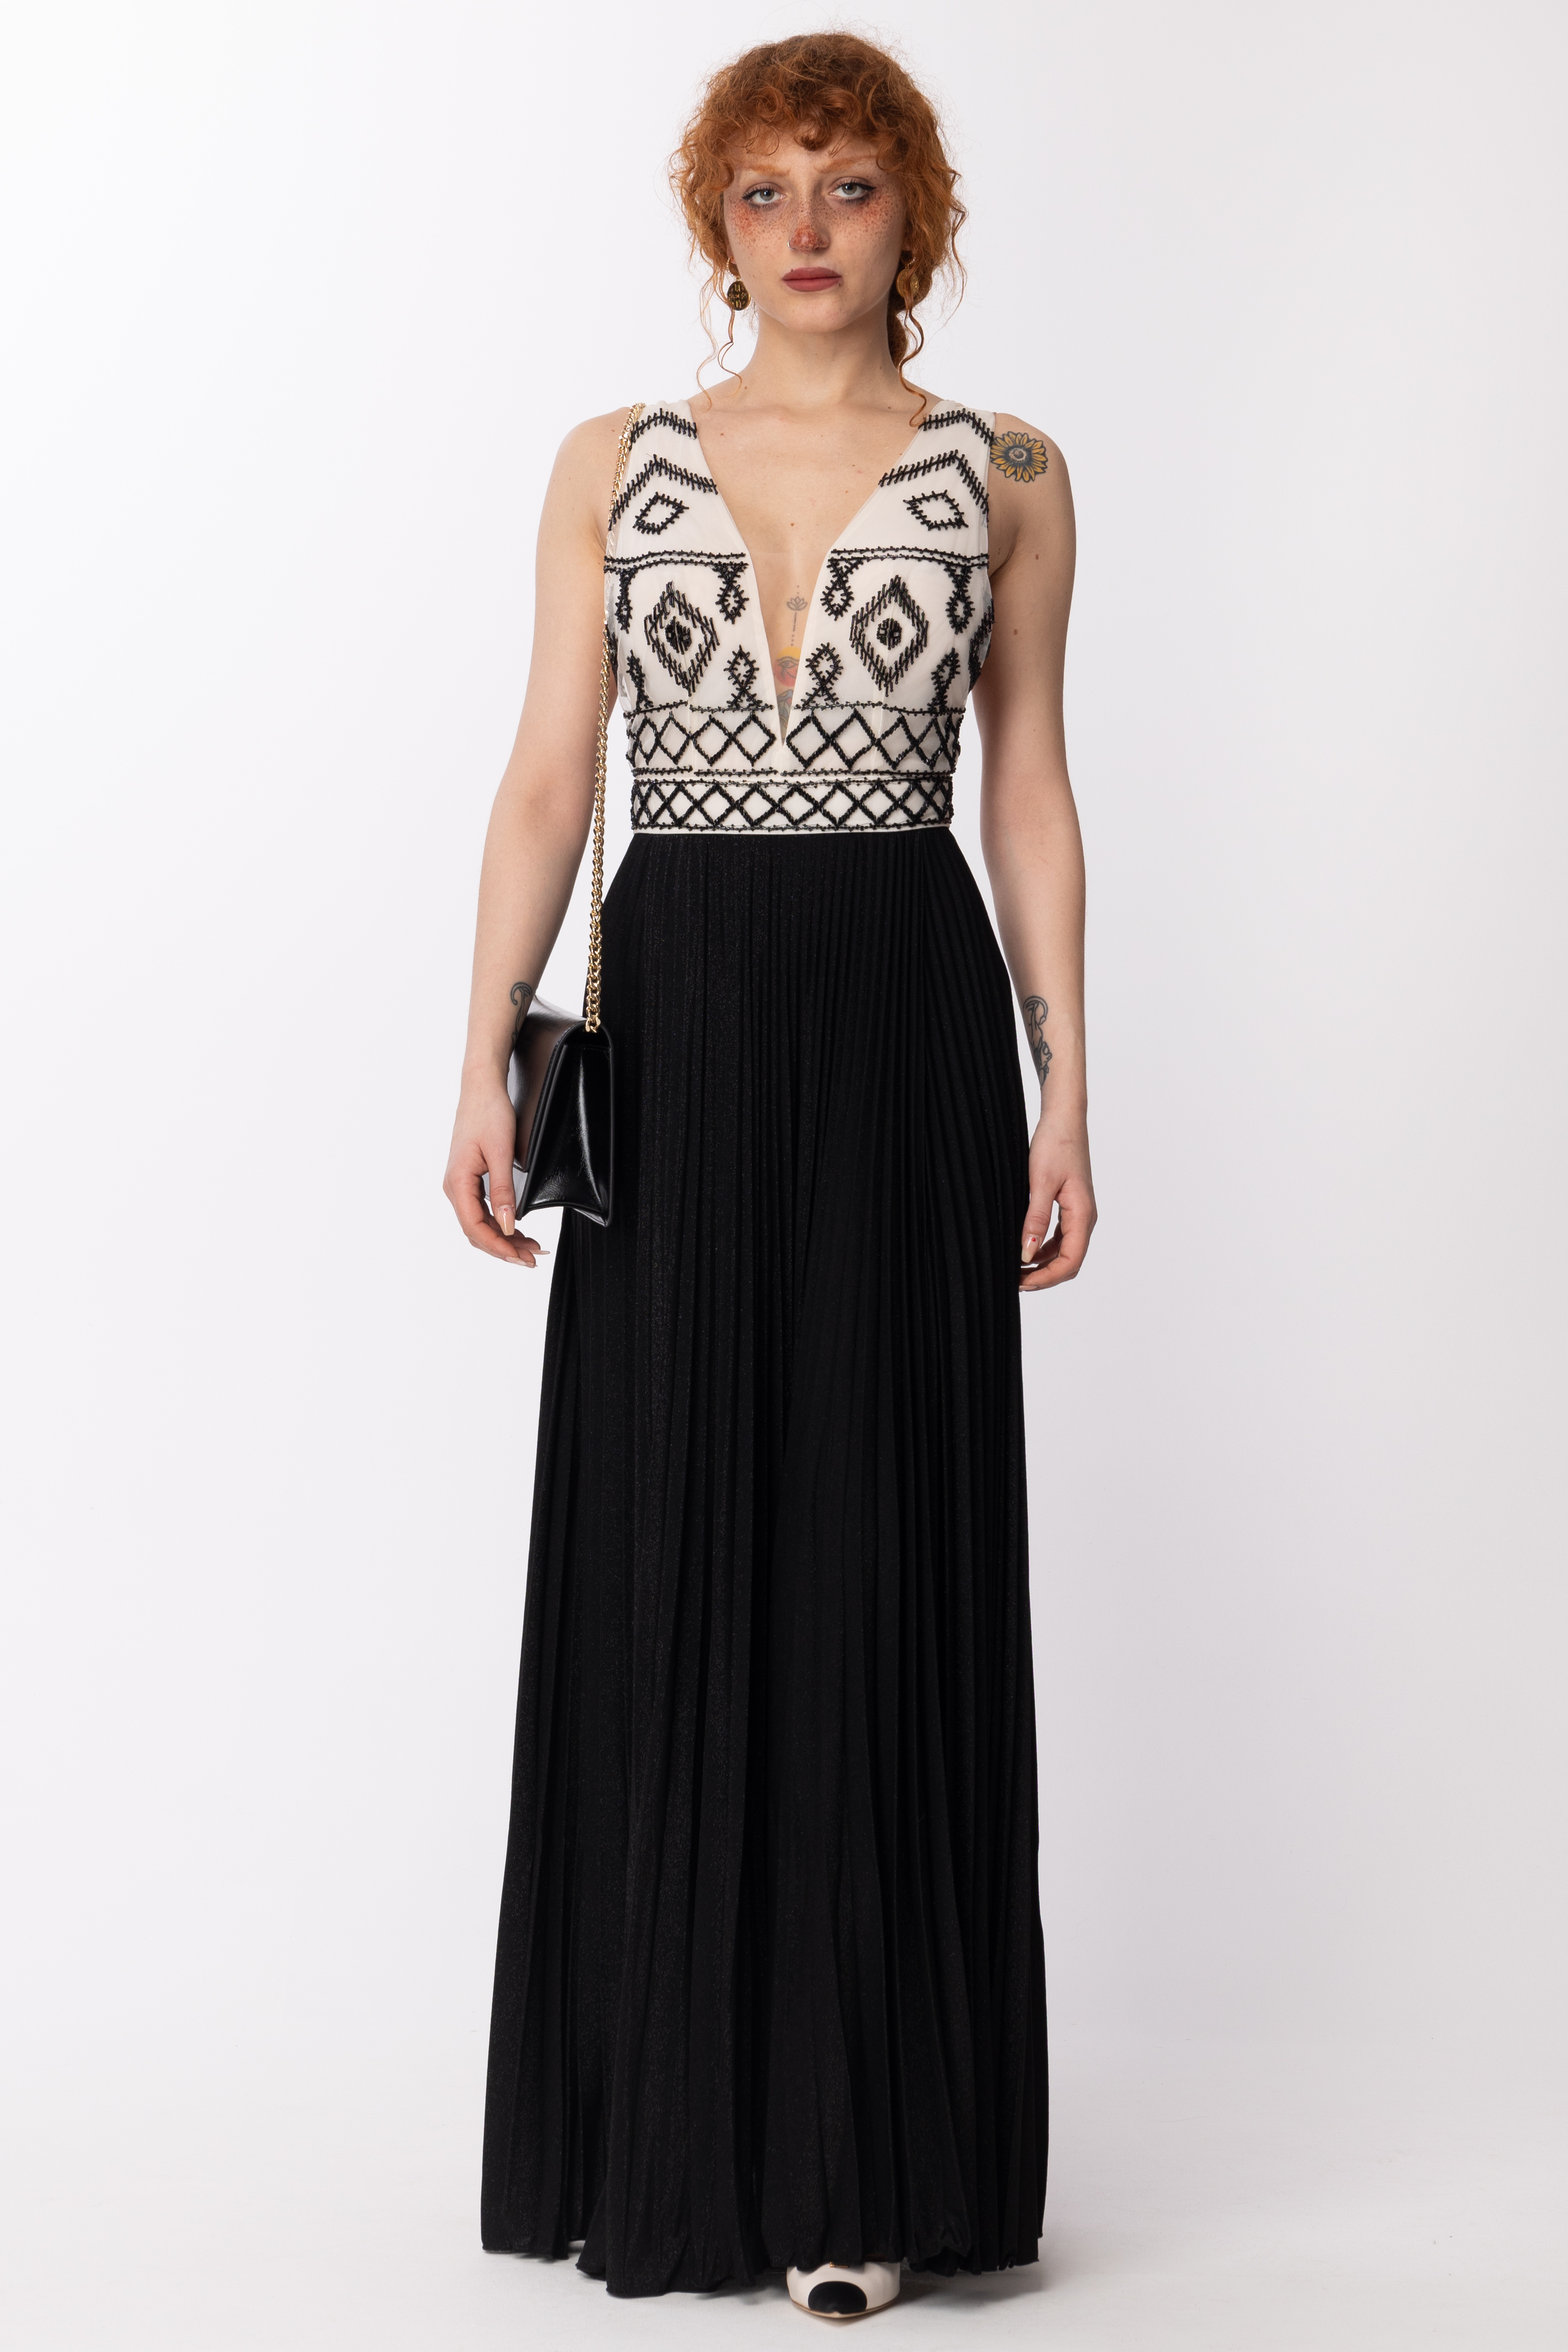 Preview: Elisabetta Franchi Red Carpet dress with embroidered bodice Burro/Nero